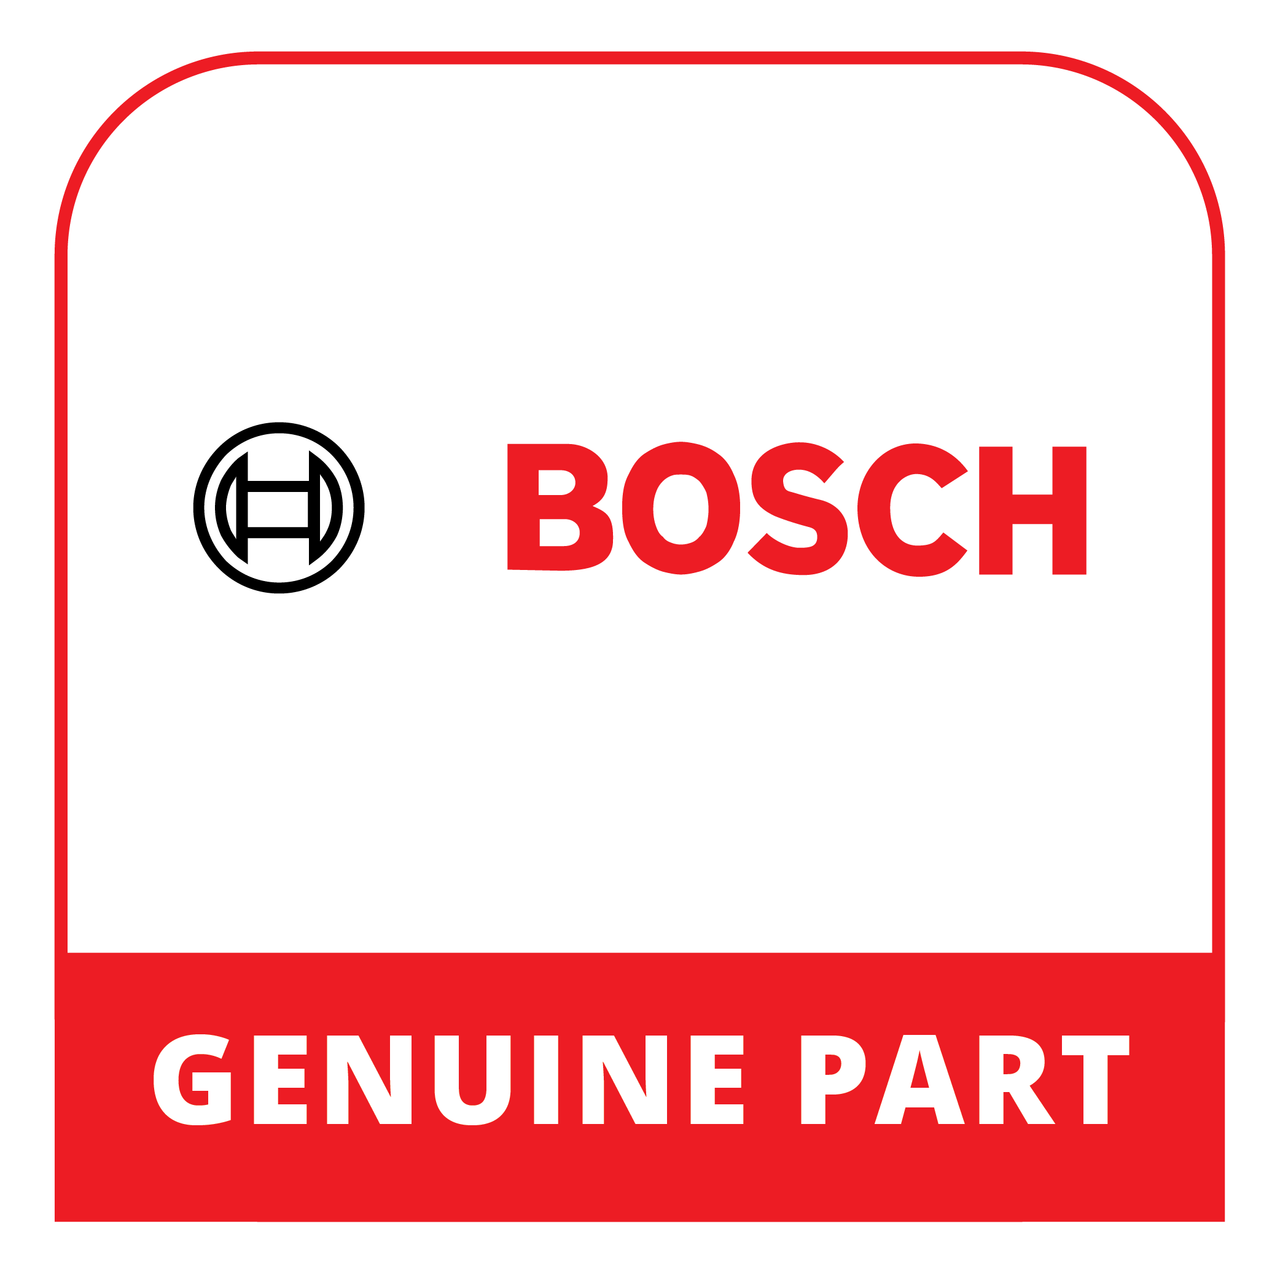 Bosch (Thermador) 12016702 - Steam Module Not Programmed - Genuine Bosch (Thermador) Part